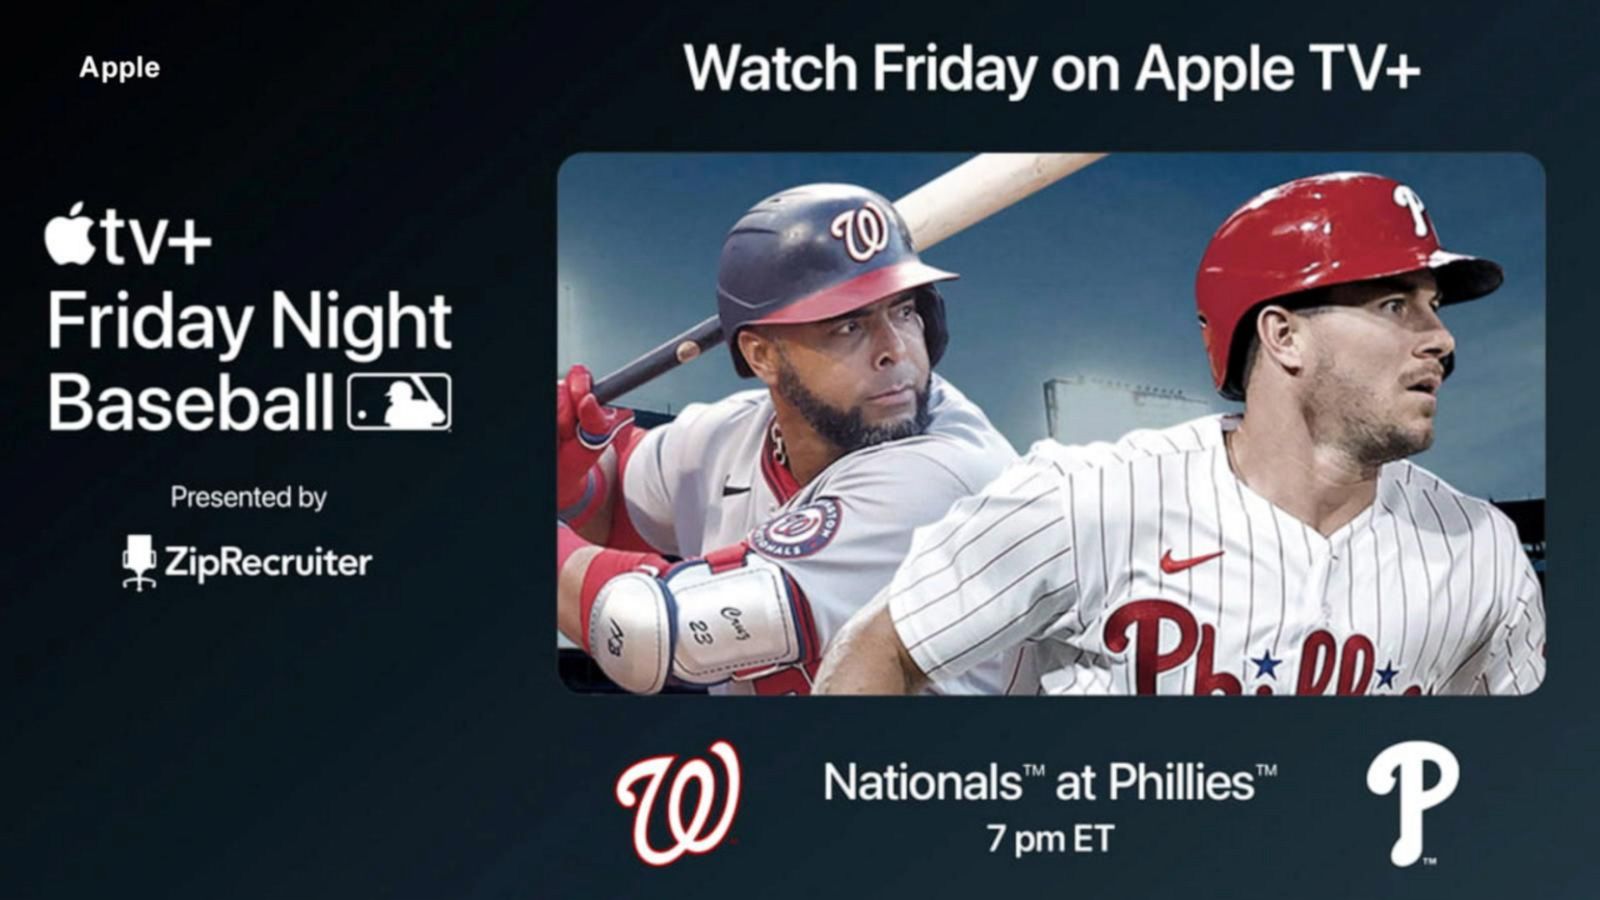 MLB games on Apple TV+ will now require an additional fee